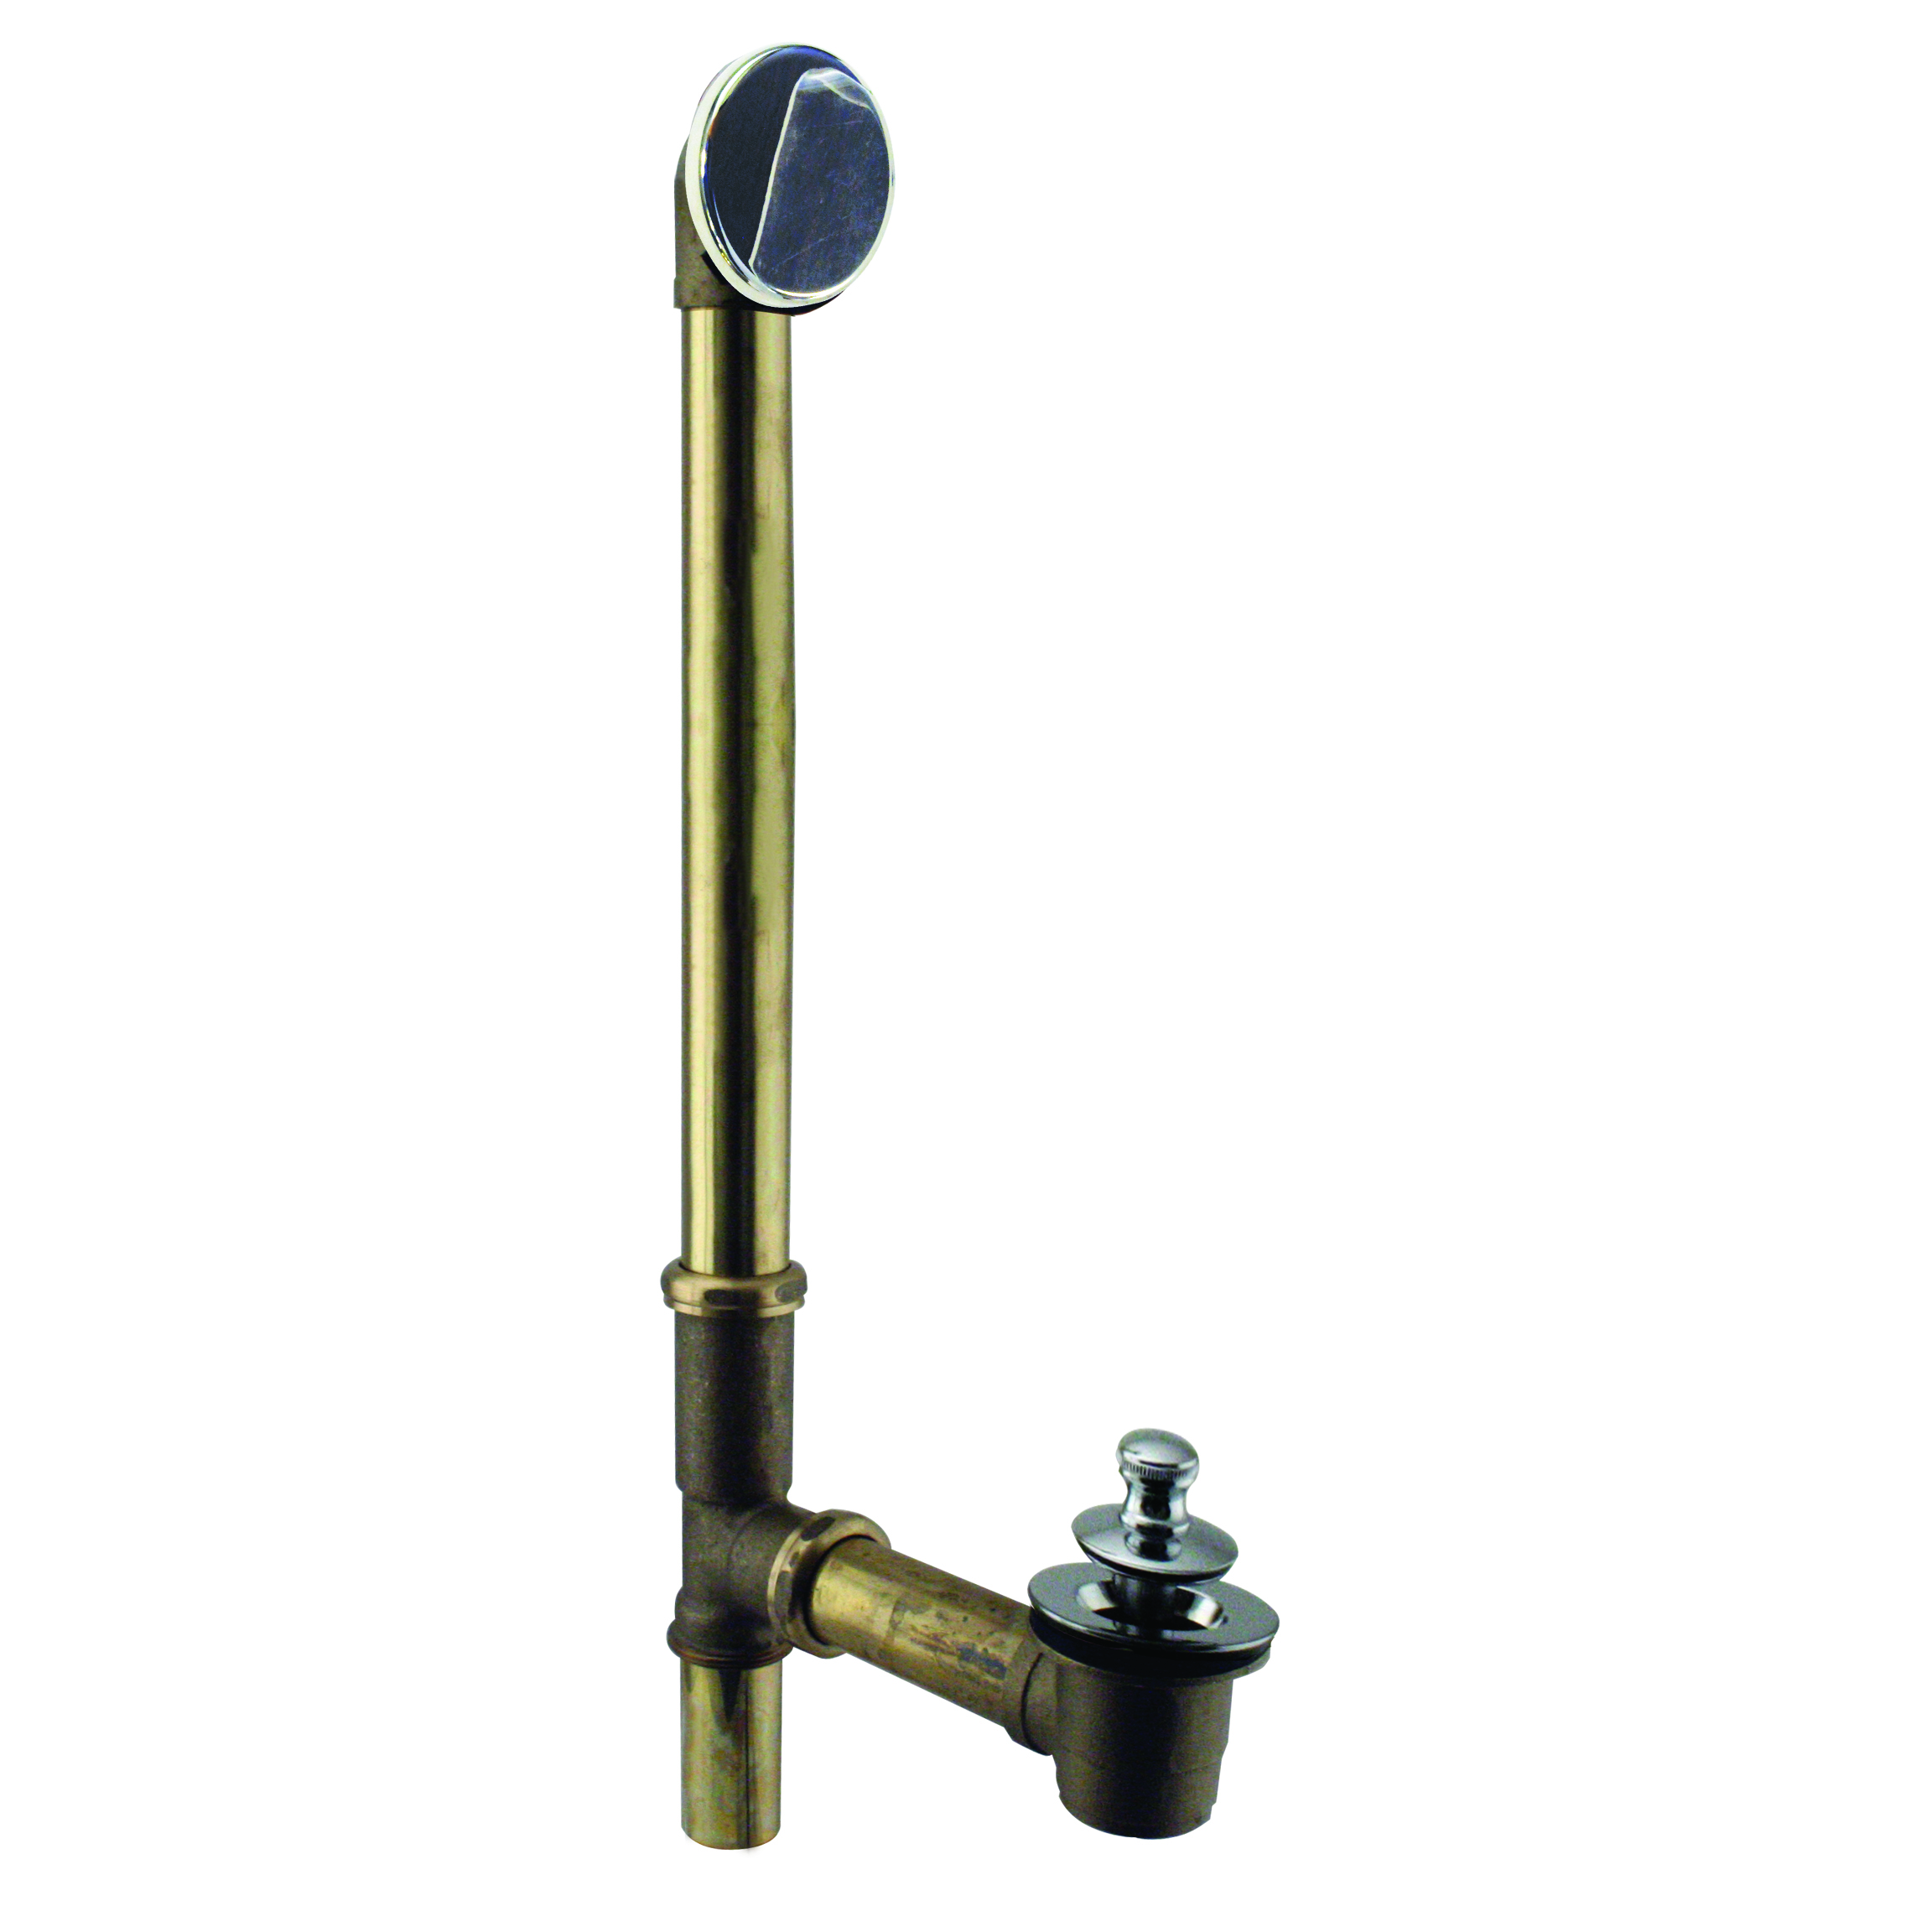 Illusionary Lift & Turn Bath Waste & Overflow with 17 gauge Brass Tubes and Cast Brass Tee and Elbows